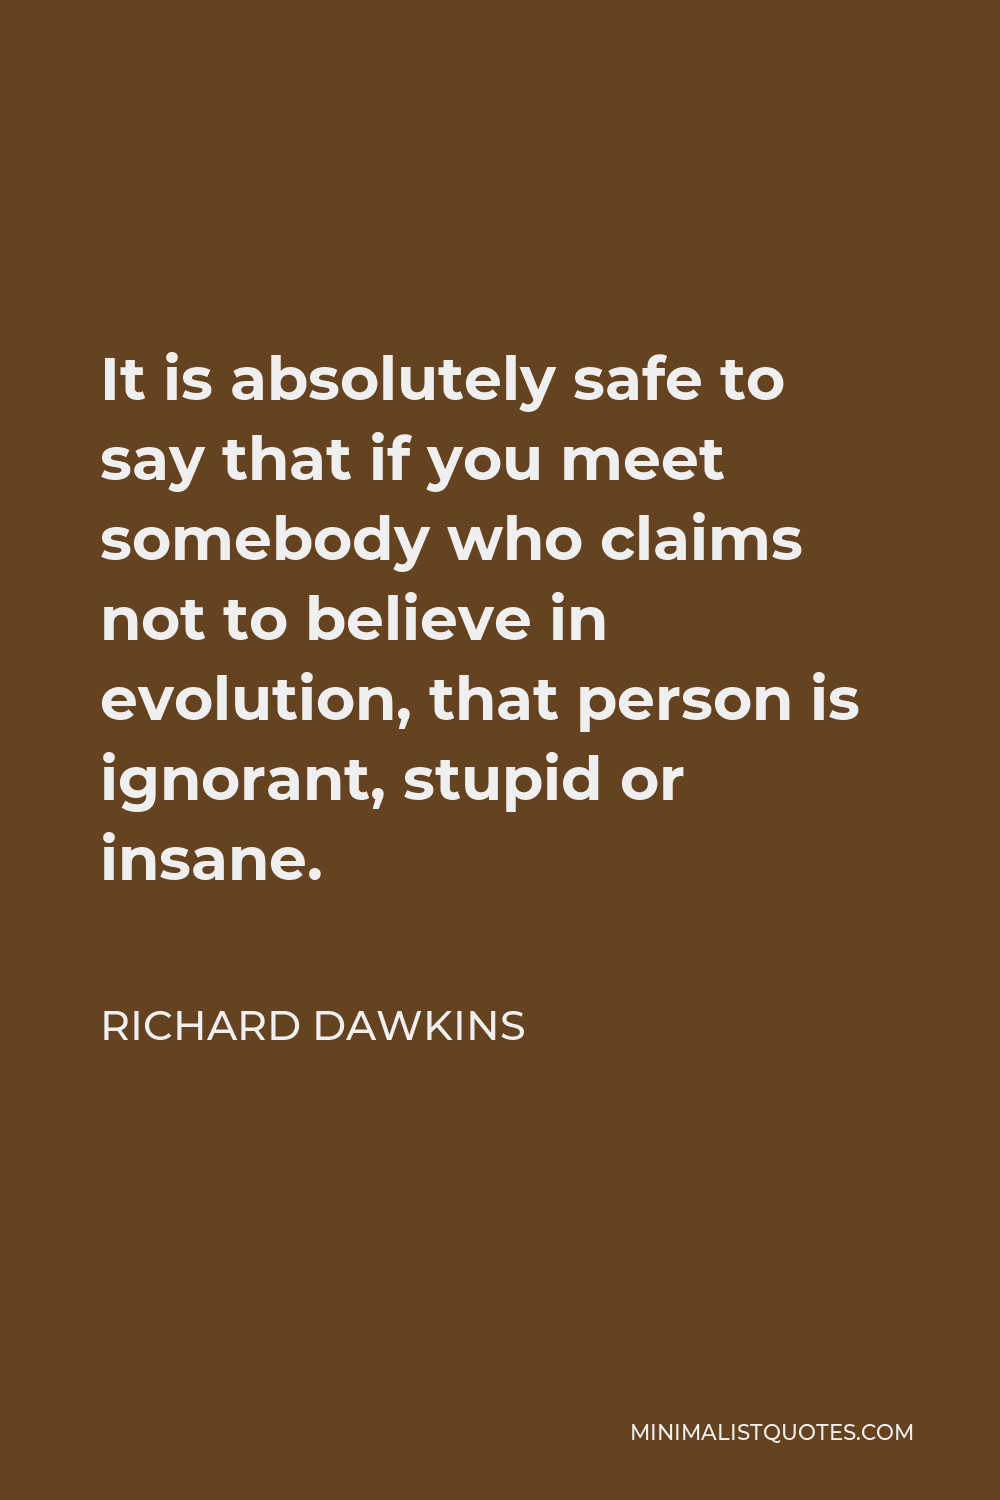 Richard Dawkins Quote - It is absolutely safe to say that if you meet somebody who claims not to believe in evolution, that person is ignorant, stupid or insane.